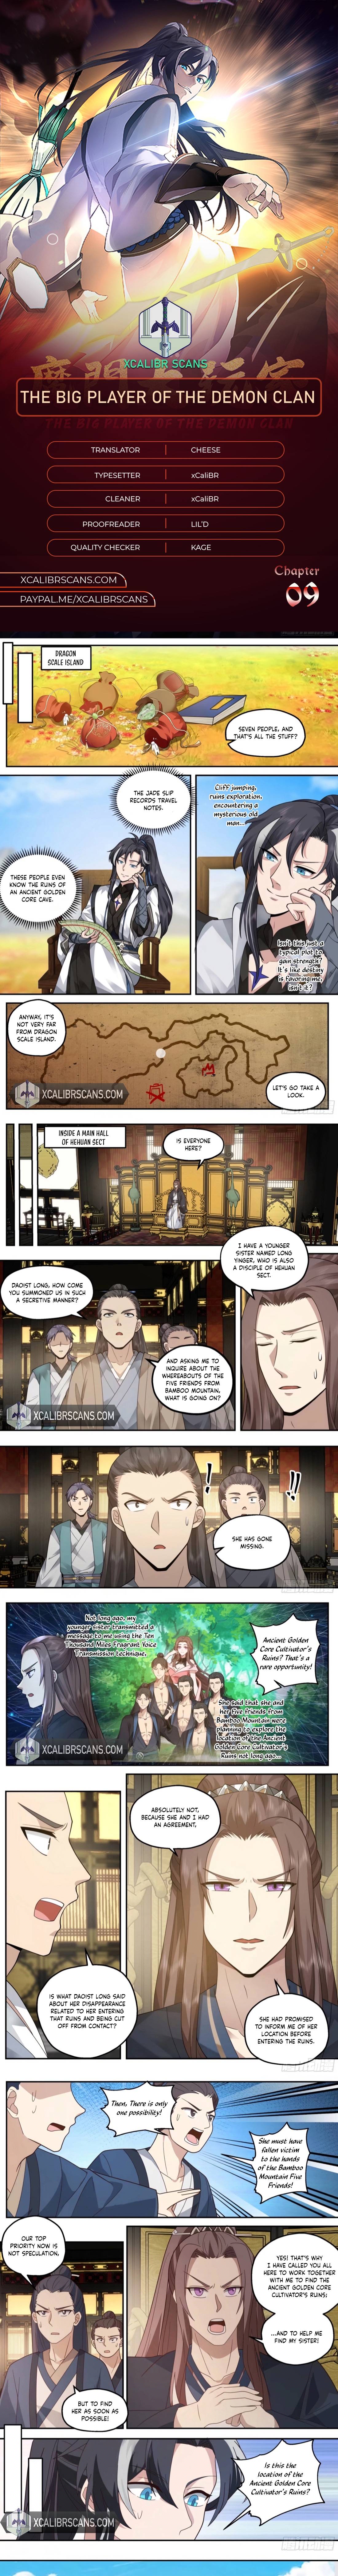 The Big Player Of The Demon Clan - Page 1